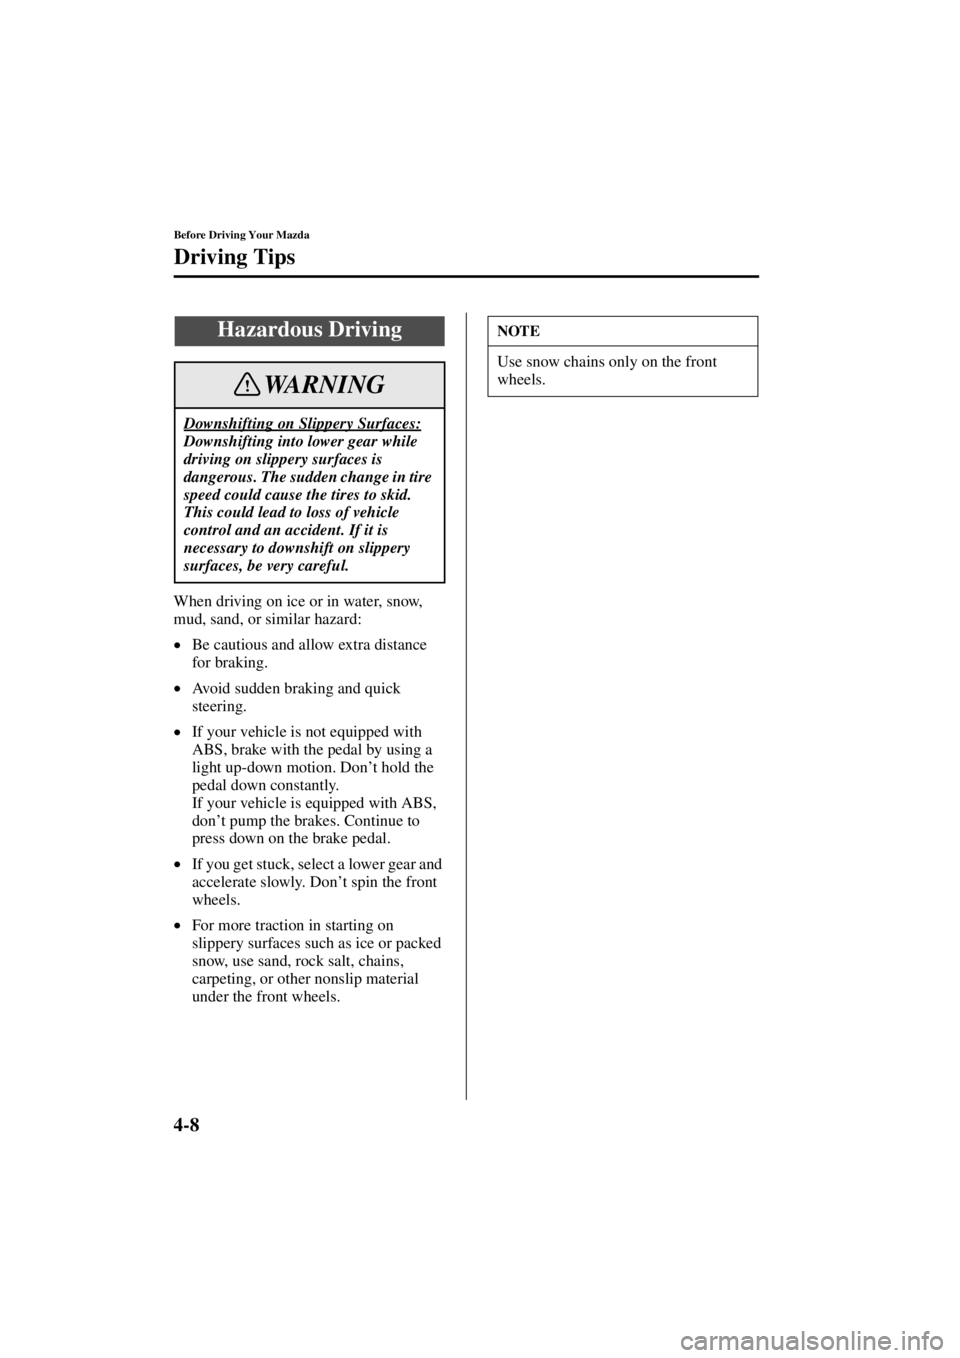 MAZDA MODEL 3 5-DOOR 2004 Service Manual 4-8
Before Driving Your Mazda
Driving Tips
Form No. 8S18-EA-03I
When driving on ice or in water, snow, 
mud, sand, or similar hazard:
•Be cautious and allow extra distance 
for braking.
• Avoid su